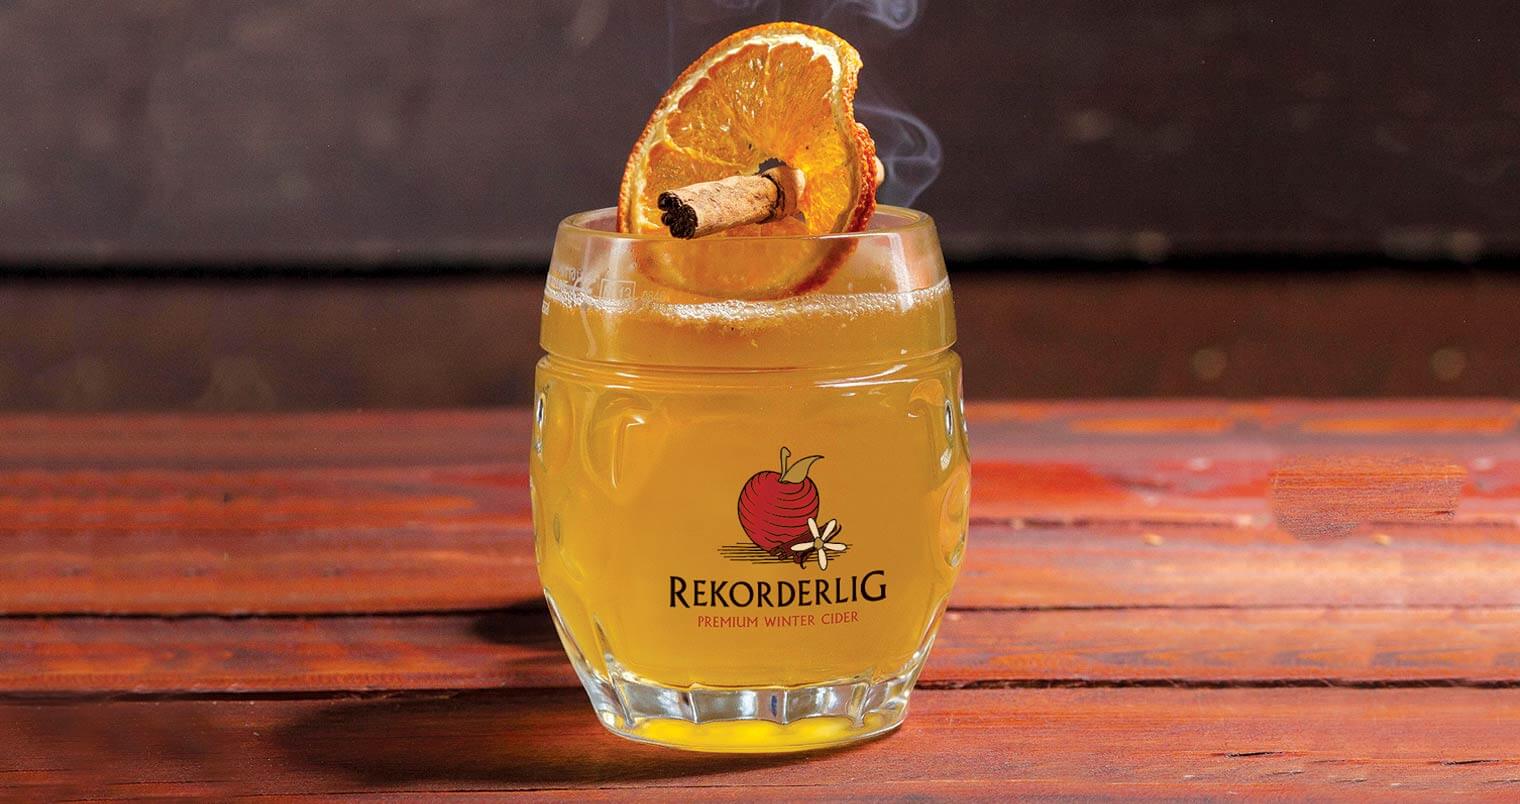 Must Mix: Rekorderlig Spiced Apple 'Hot Swede' Cocktail, featured image